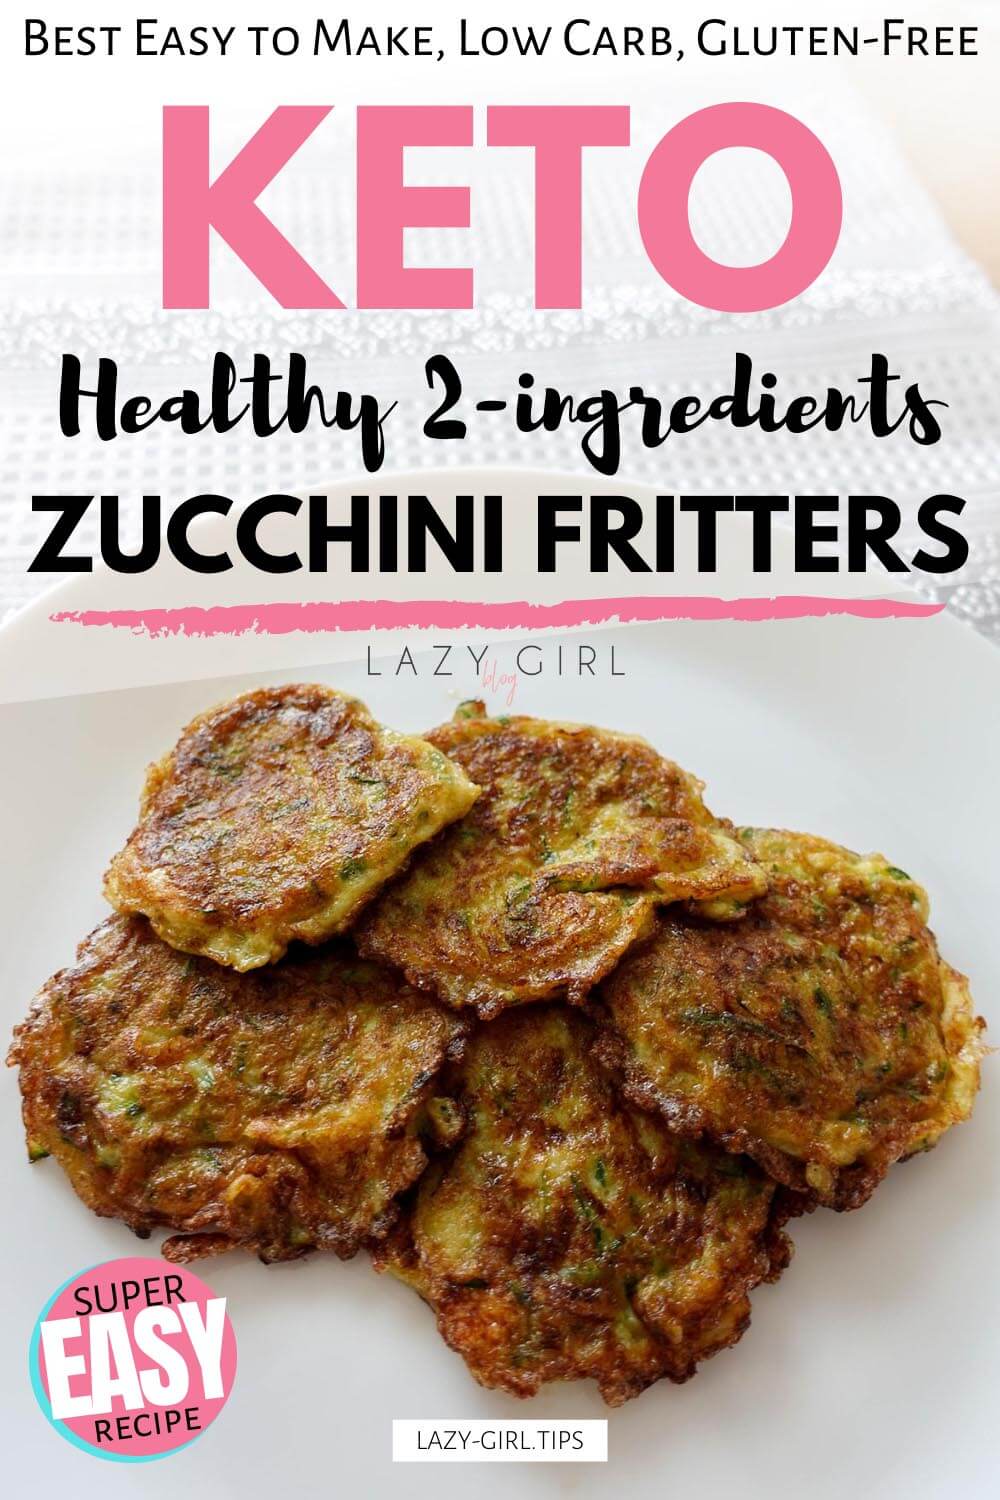 Healthy 2-ingredients Keto Zucchini Fritters Recipe.